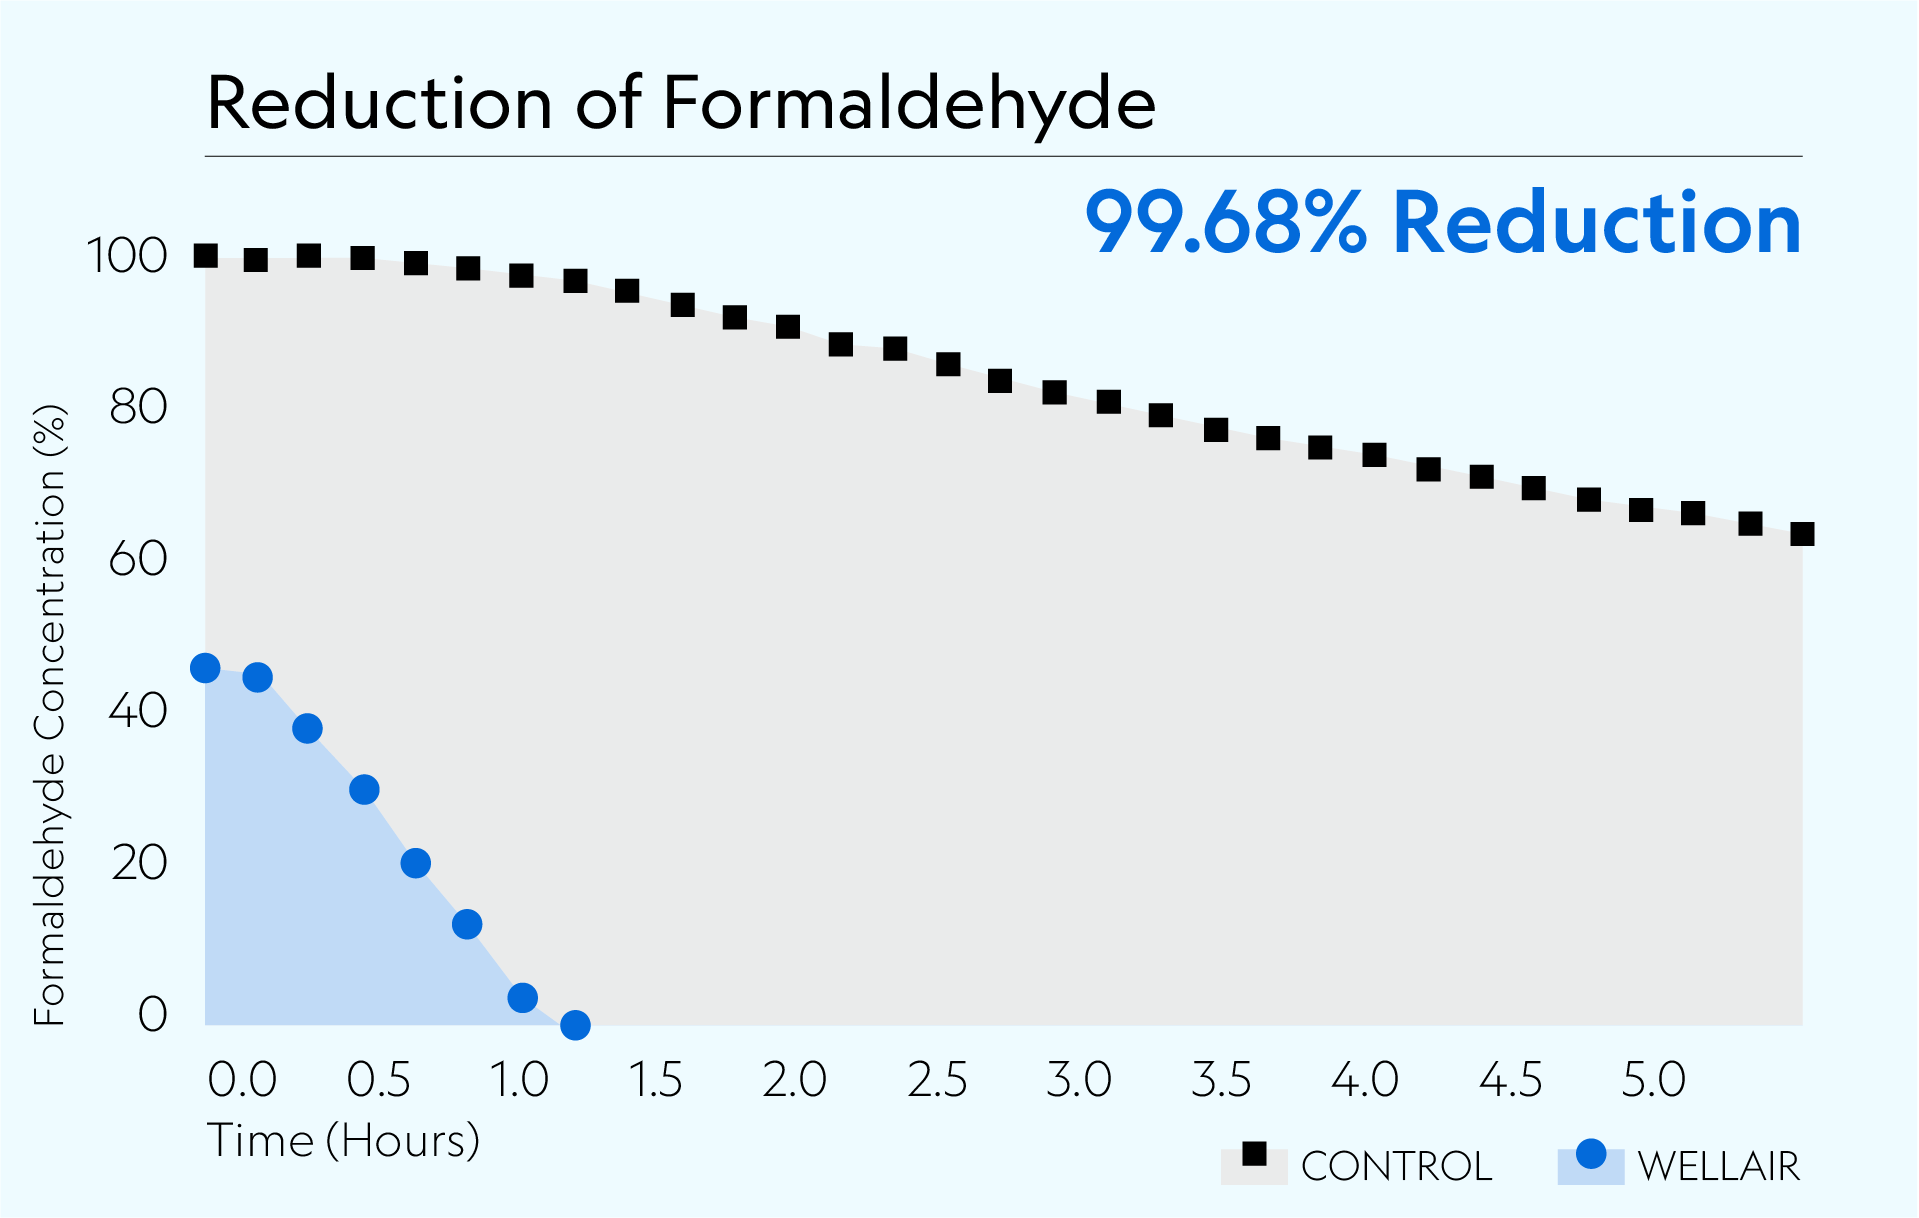 Defend 1050 achieved 99.68% reduction of Formaldehyde